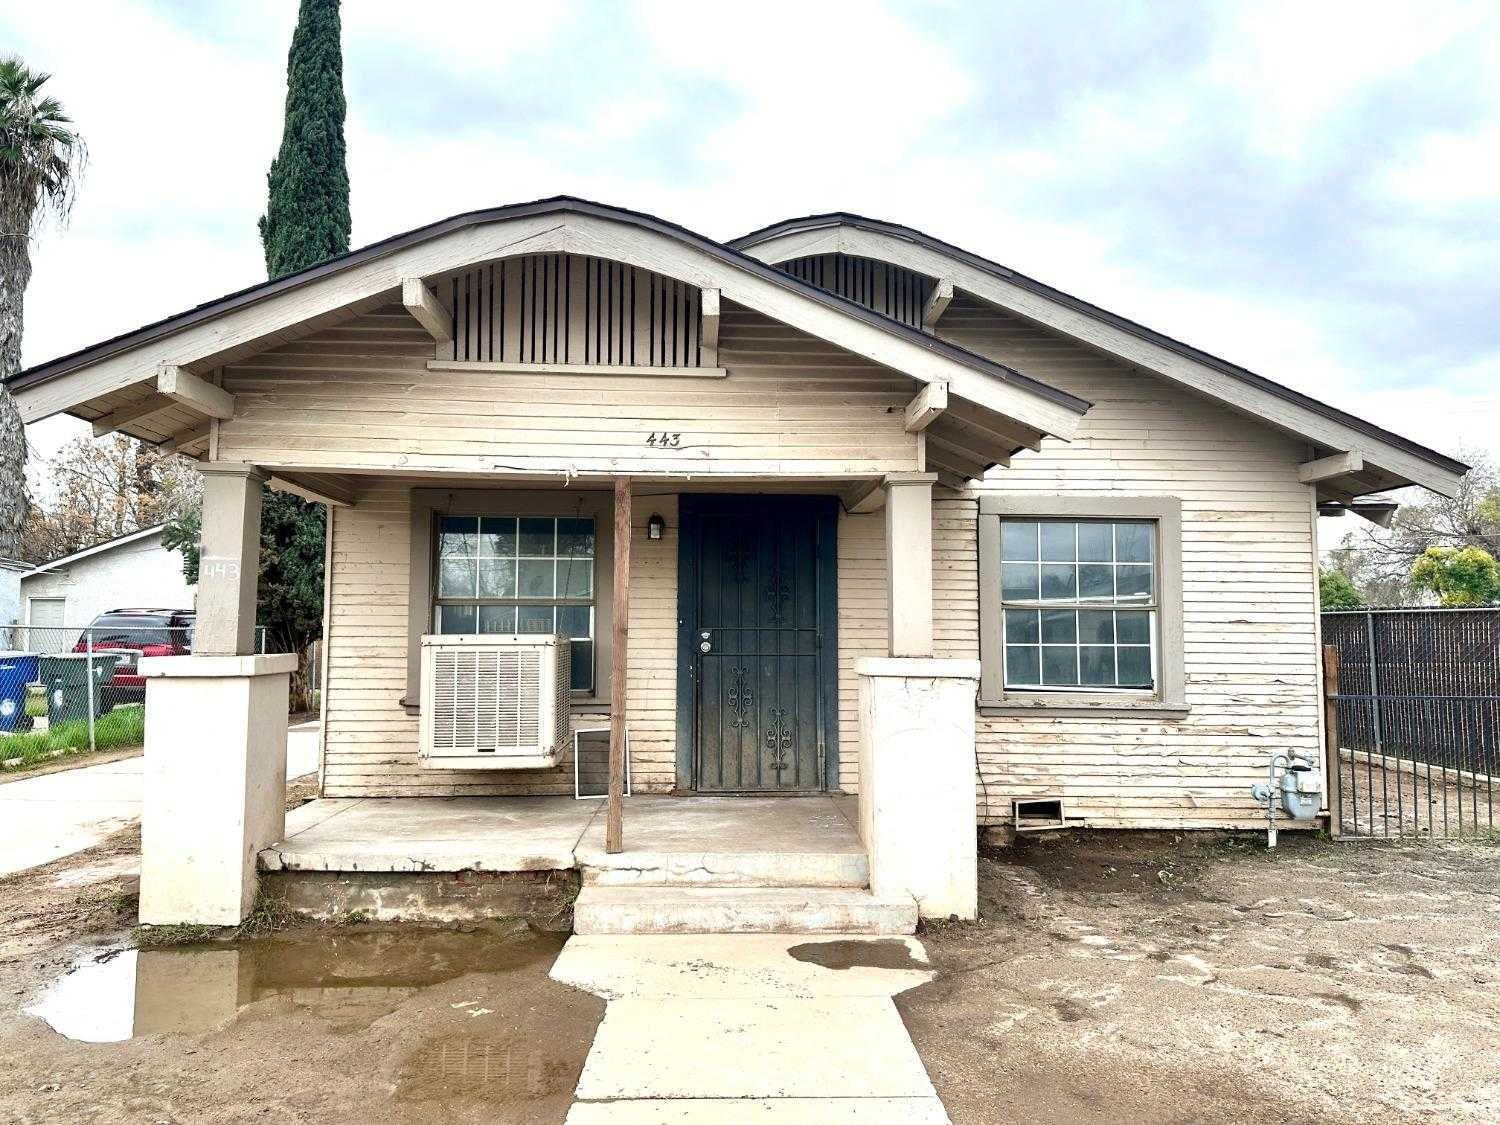 $219,900 - 3Br/2Ba -  for Sale in West Brae, Fresno